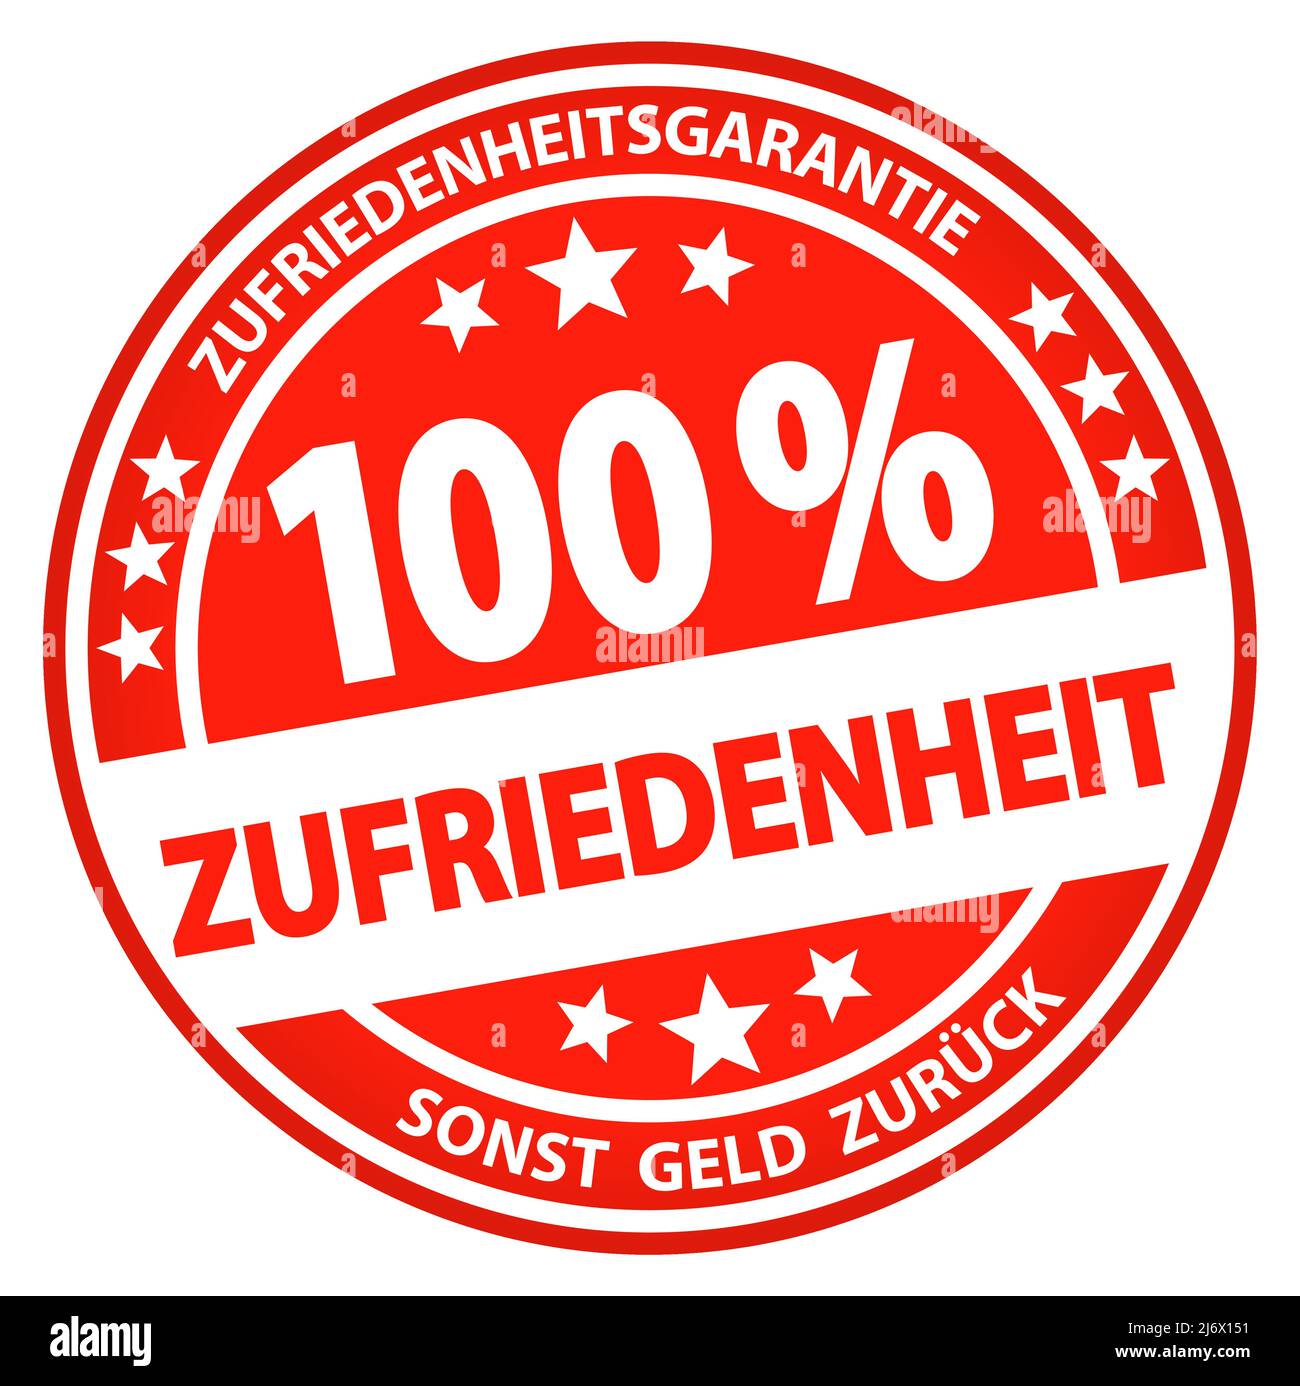 eps vector file. Round button for business and advertising usage, isolated on white background. With text 100% satisfaction (german) Stock Vector